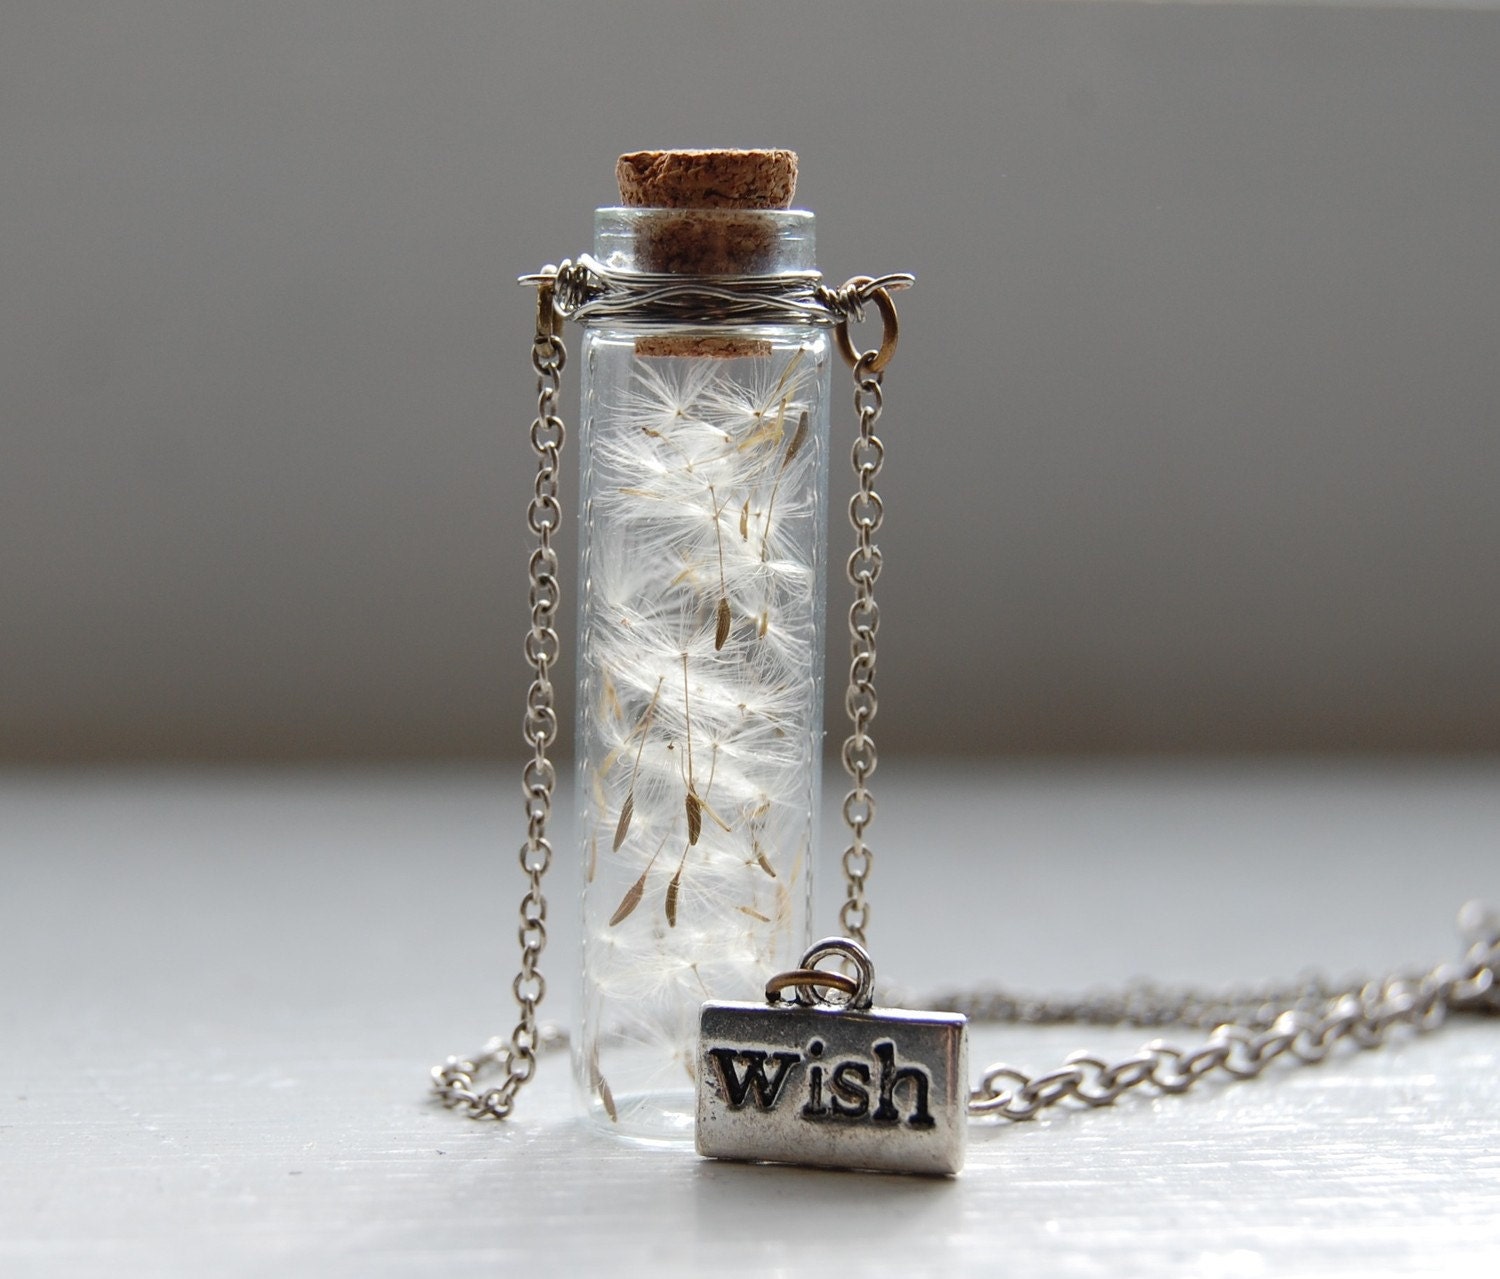 As You Wish Necklace by EarlyBright